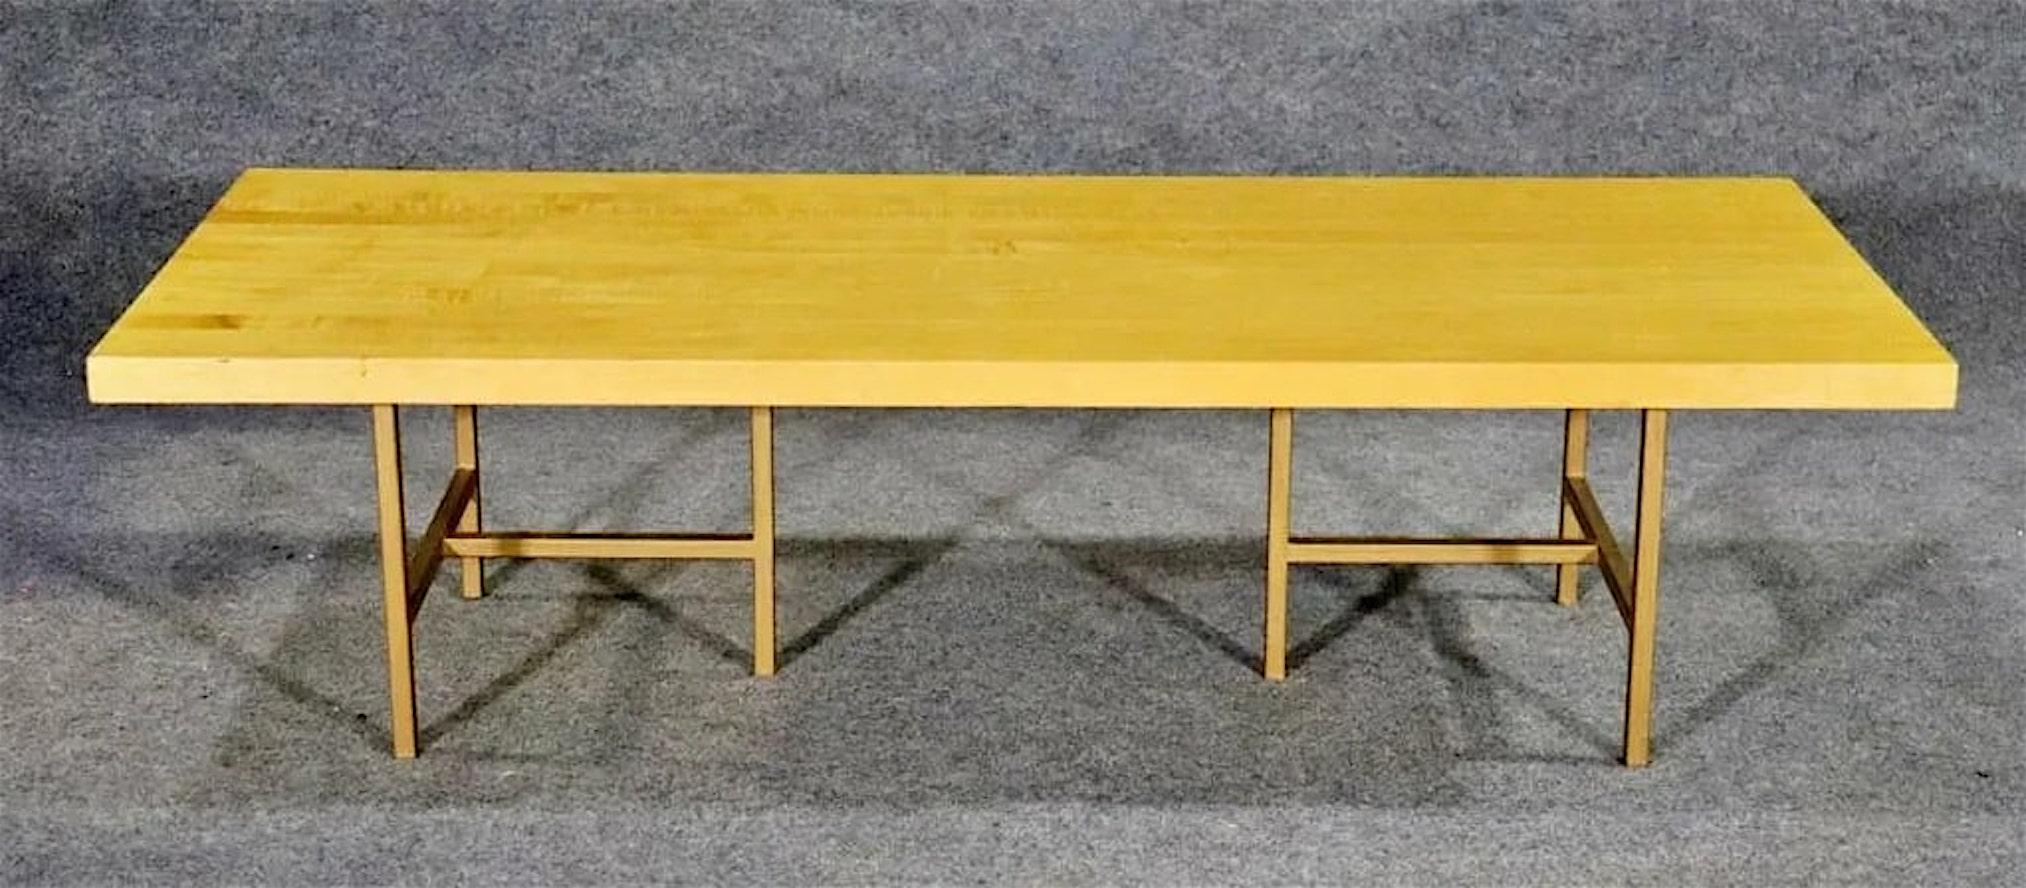 Mid-Century Modern style coffee table with butcher block wood top on a metal base.
Please confirm location NY or NJ.